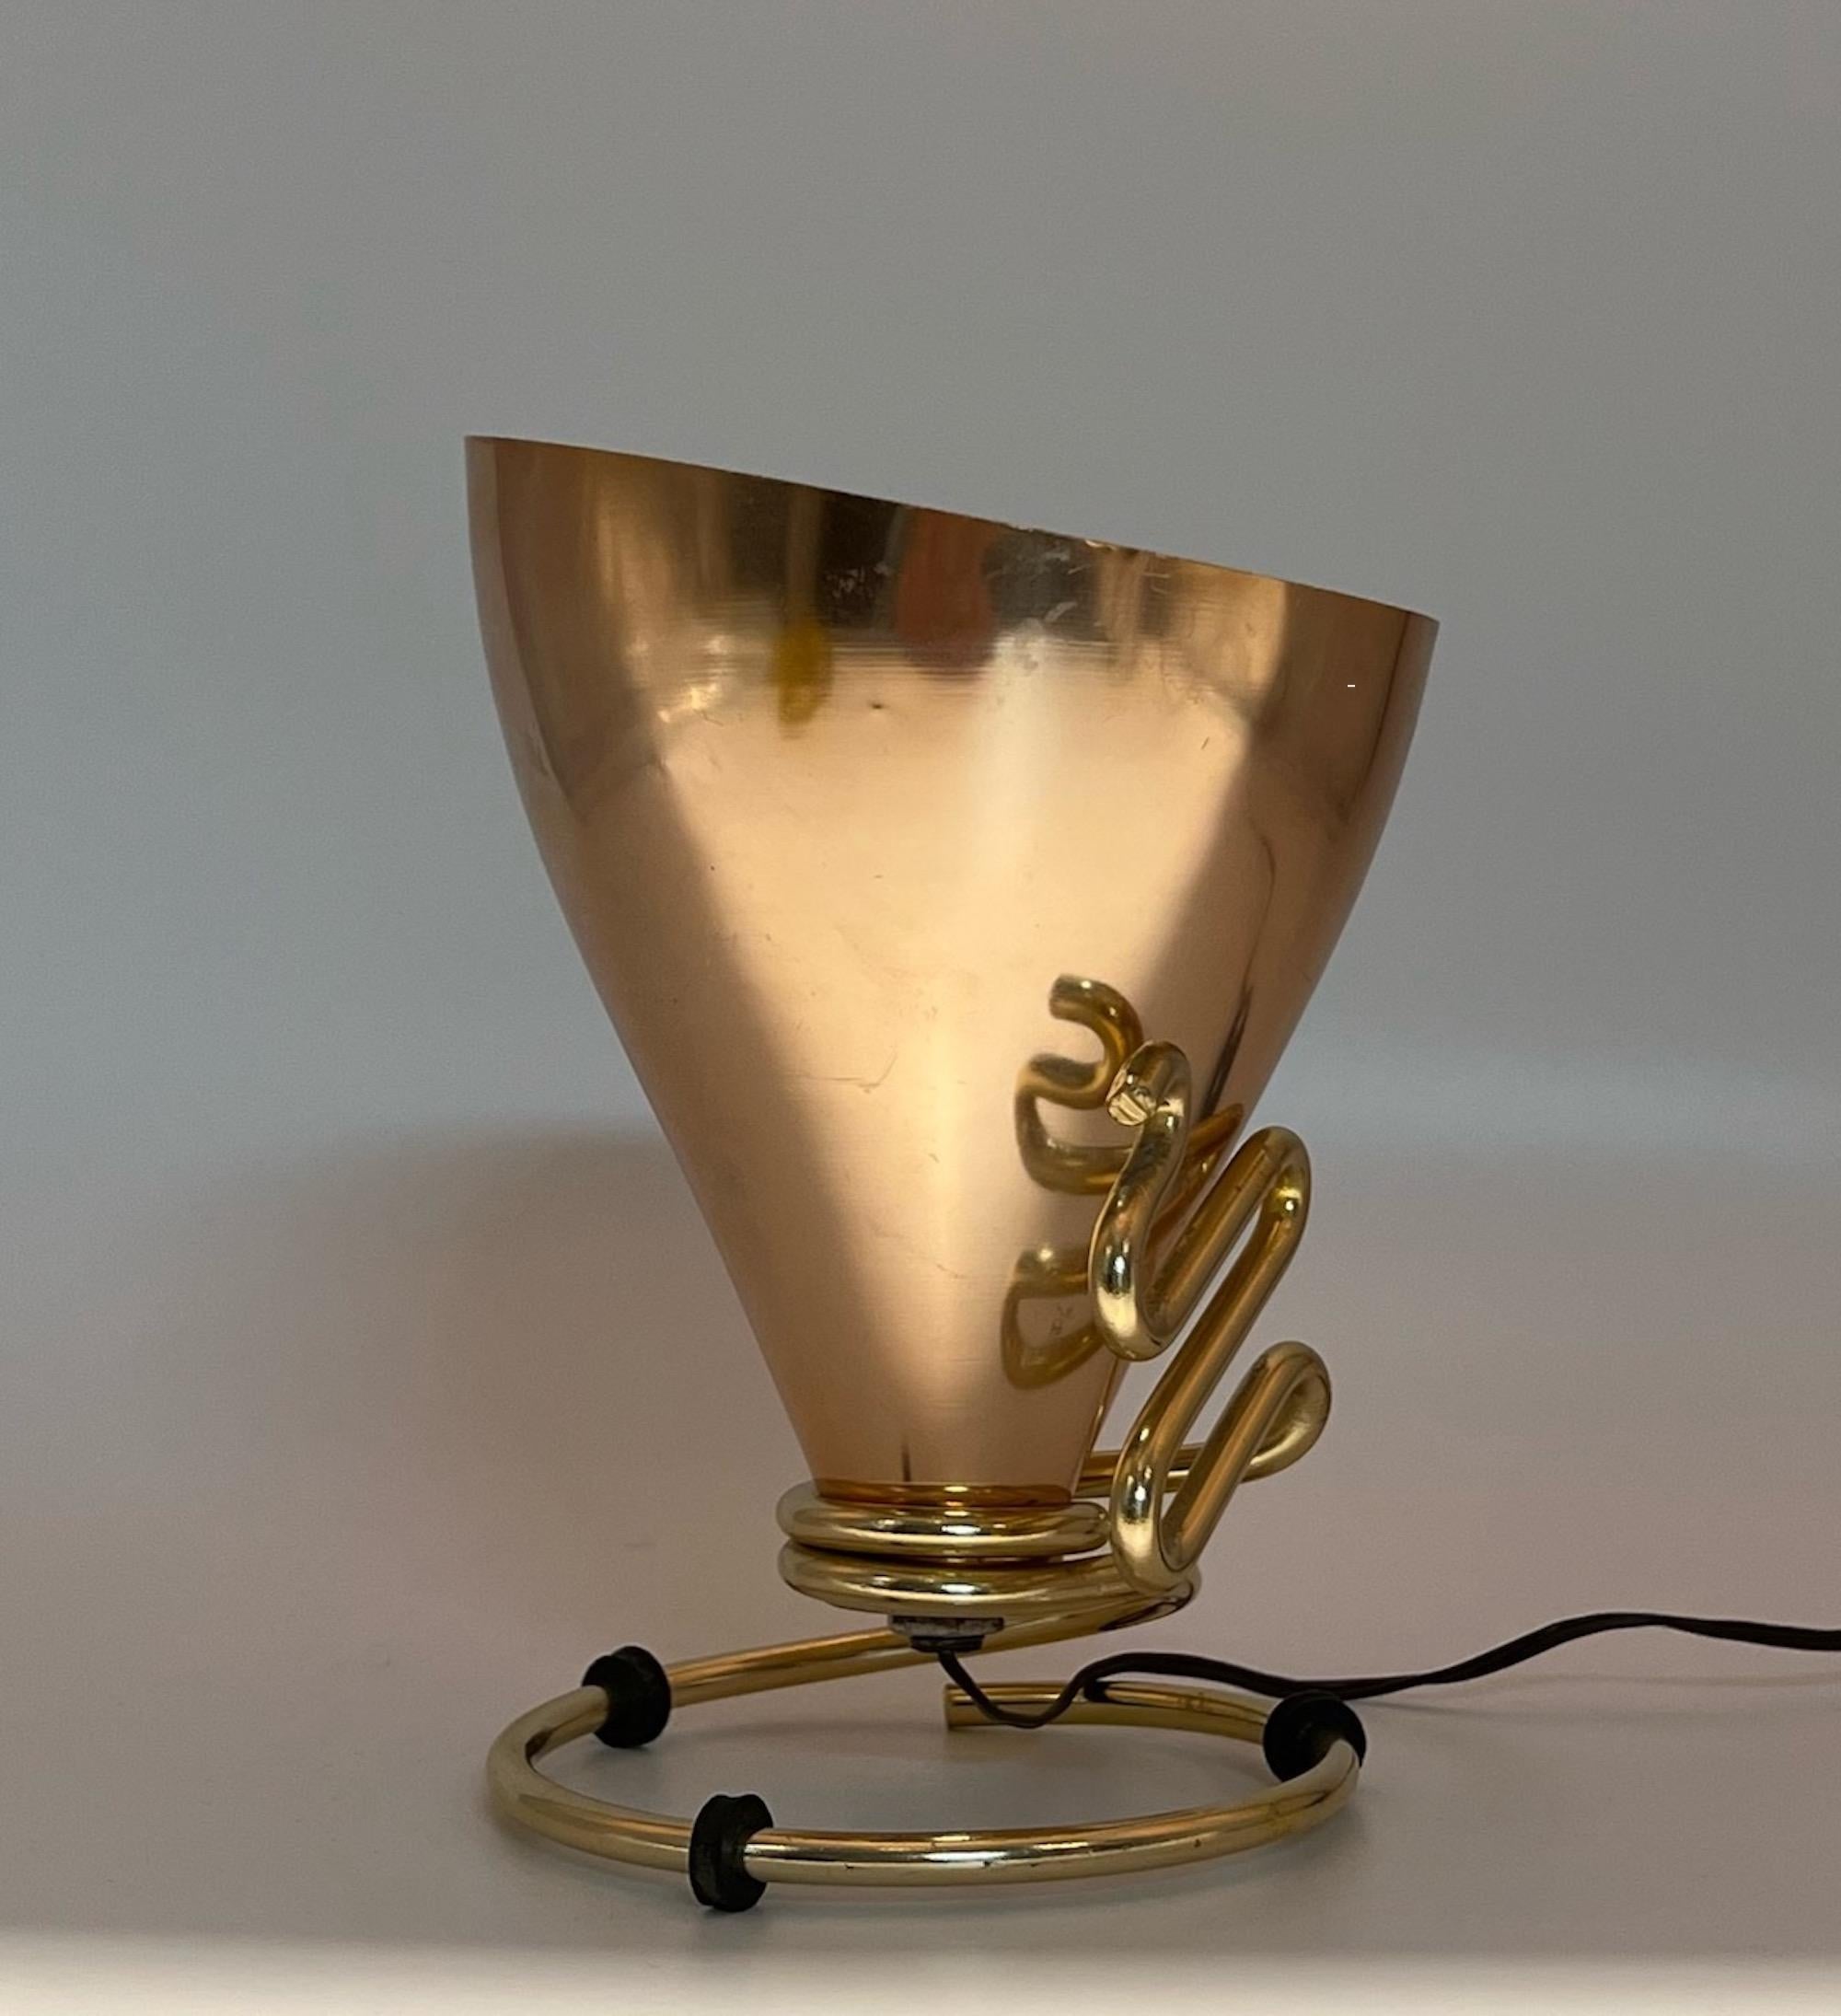 Rare and iconic lamp conceived by the creative genius of Ettore Sottsass and produced by Rinnovel.

Distinctive aluminium cone lampshade with a shining golden color, supported by a metal frame representing a snake.

This lamp was conceived to be